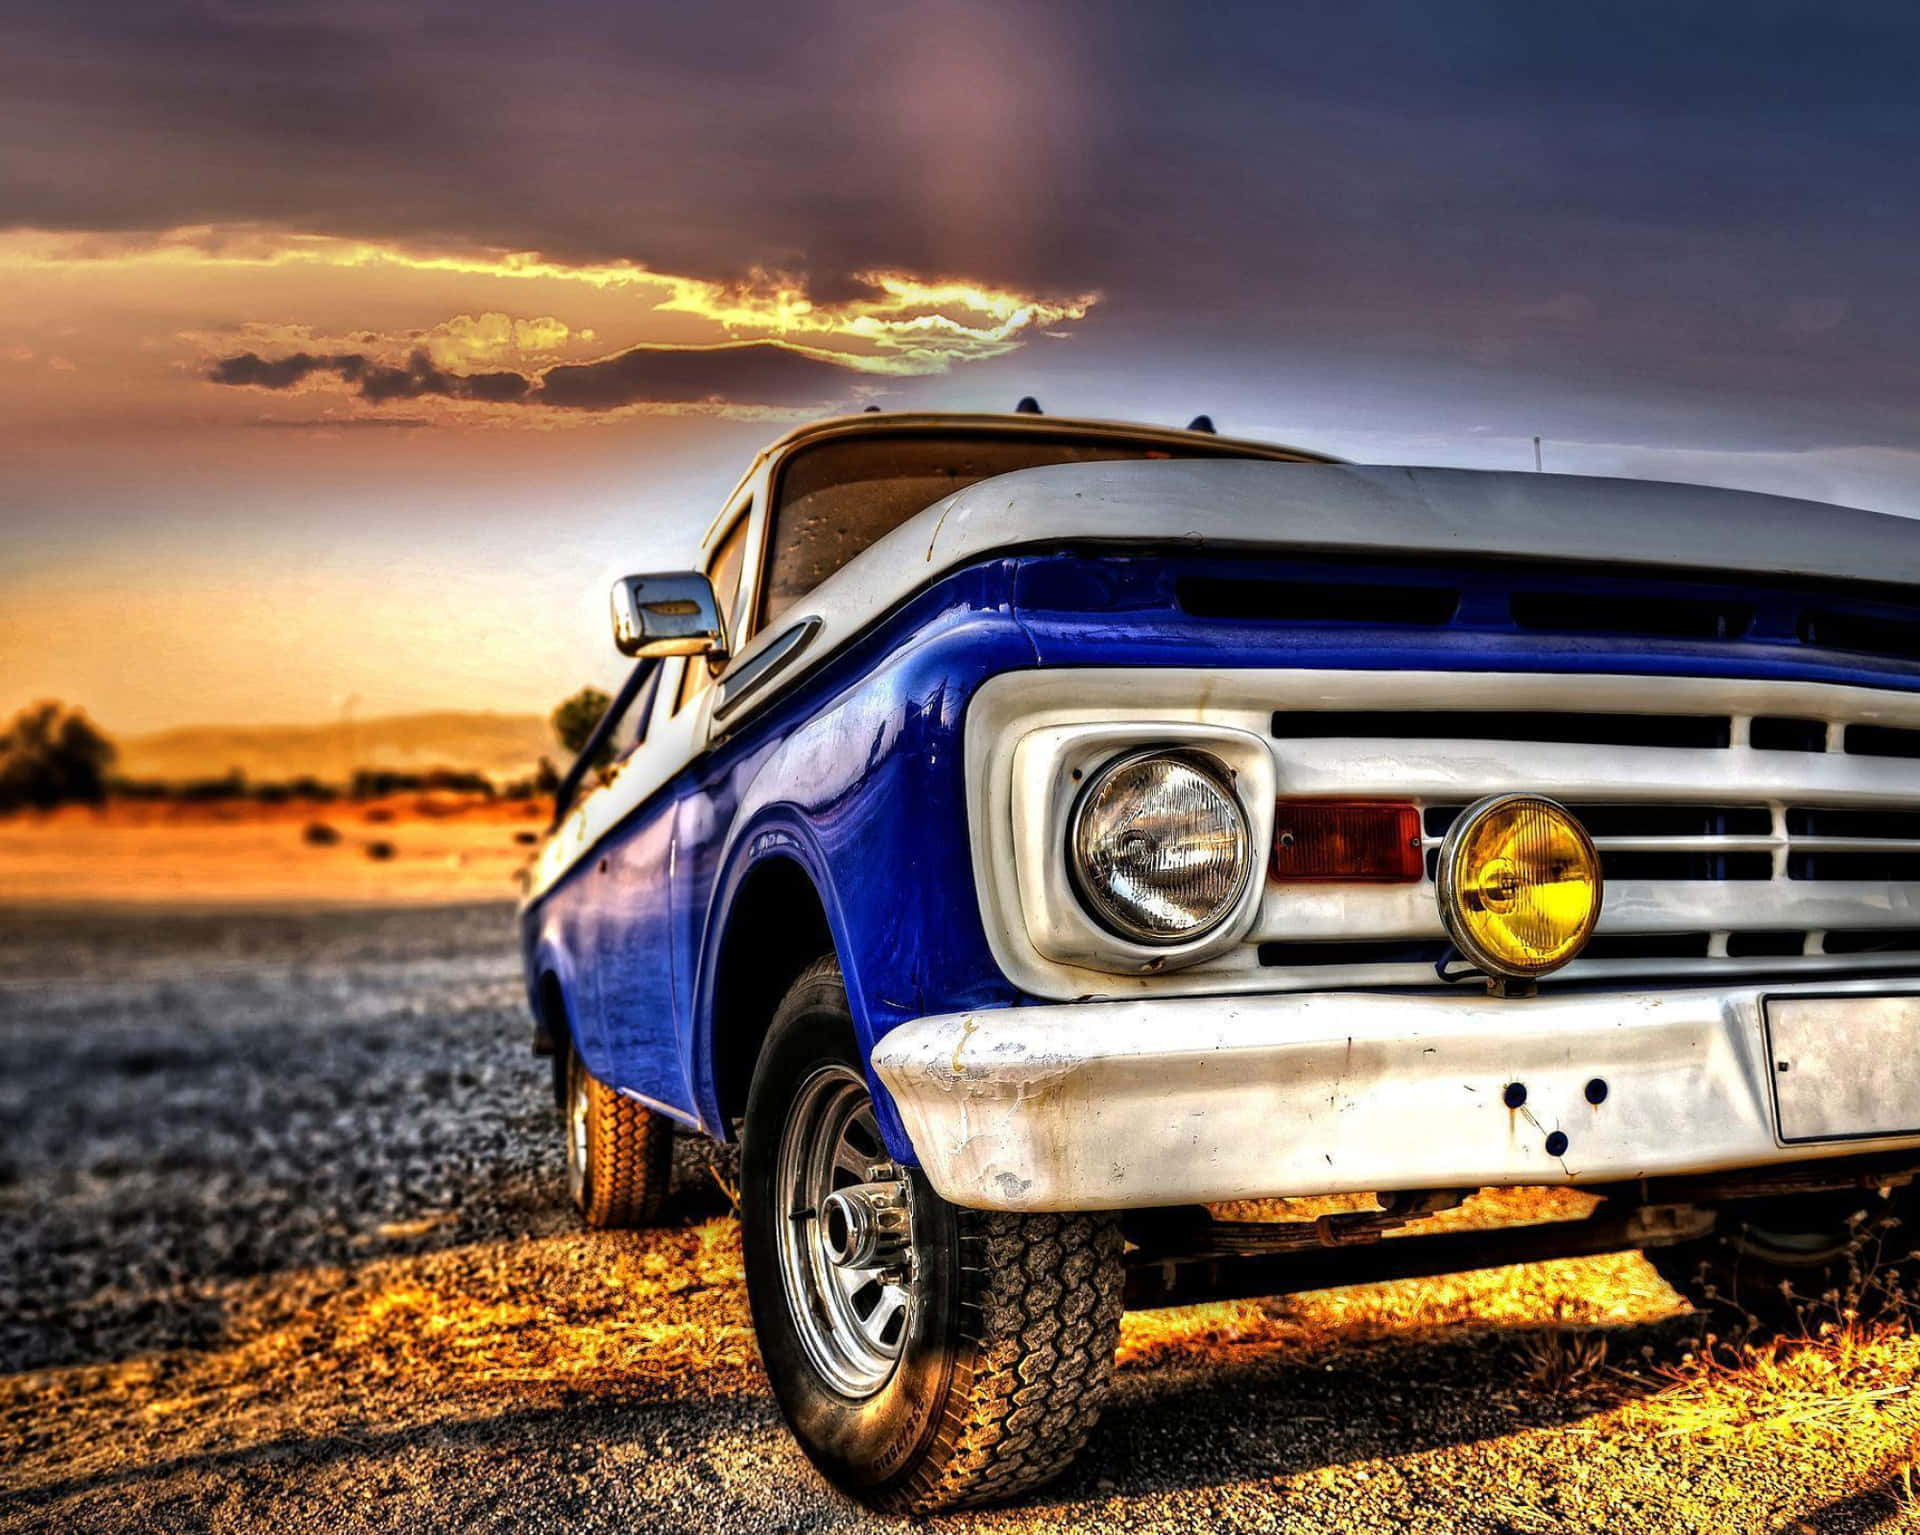 Download A Blue Truck Parked In The Dirt Wallpaper | Wallpapers.com